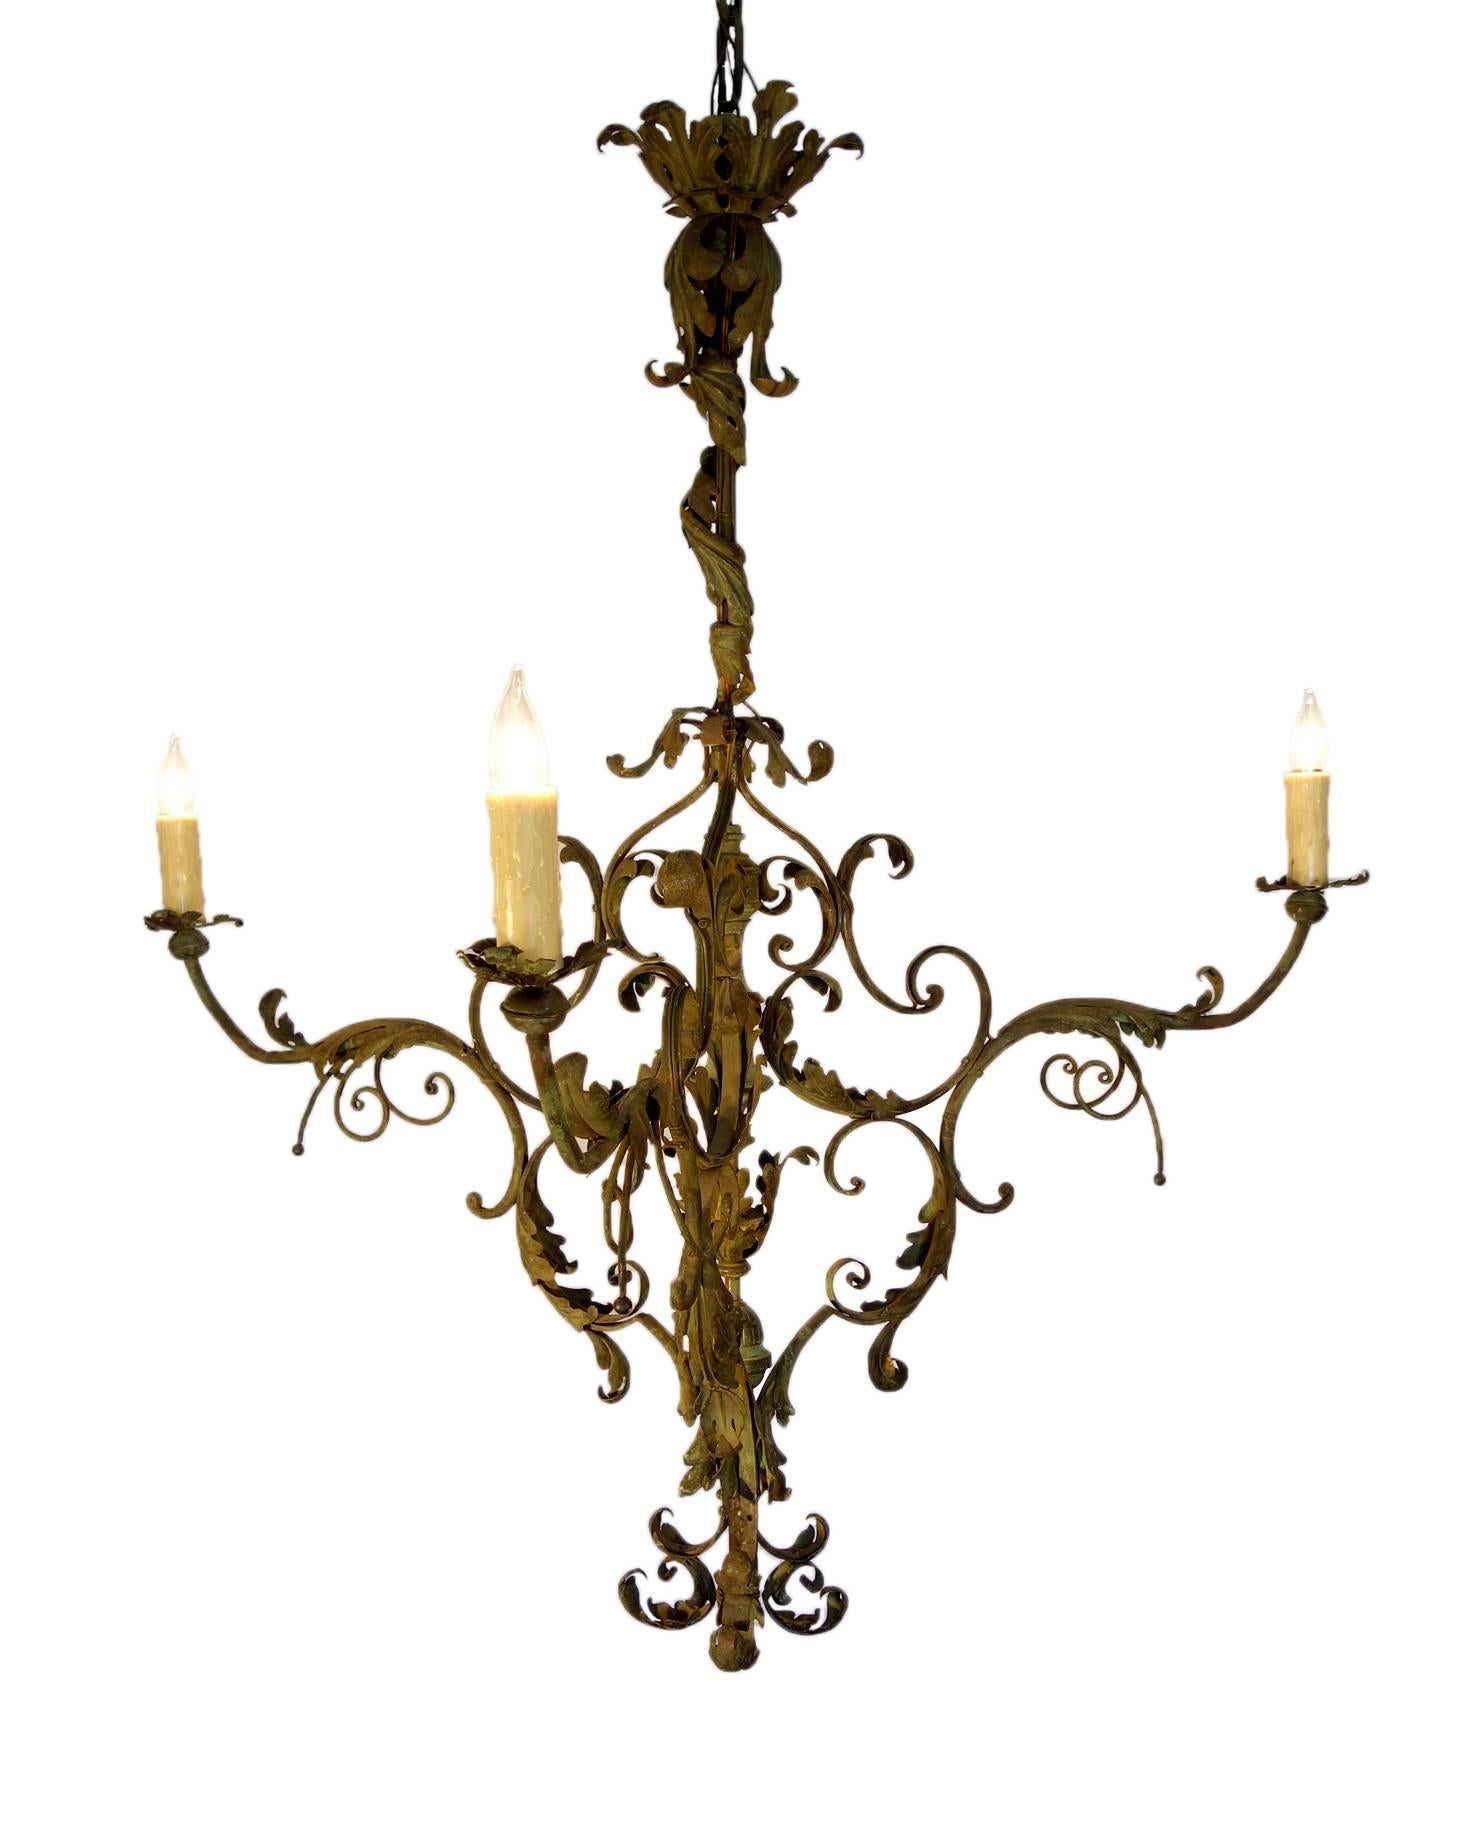 One of a kind Tuscan wrought iron green three arms chandelier. Fantastic green patina hand-forged iron leaf and twisted floral motifs create a piece of art. 

UL newly rewired. 

Measures: 43" W x 50" H, plus 29" chain.